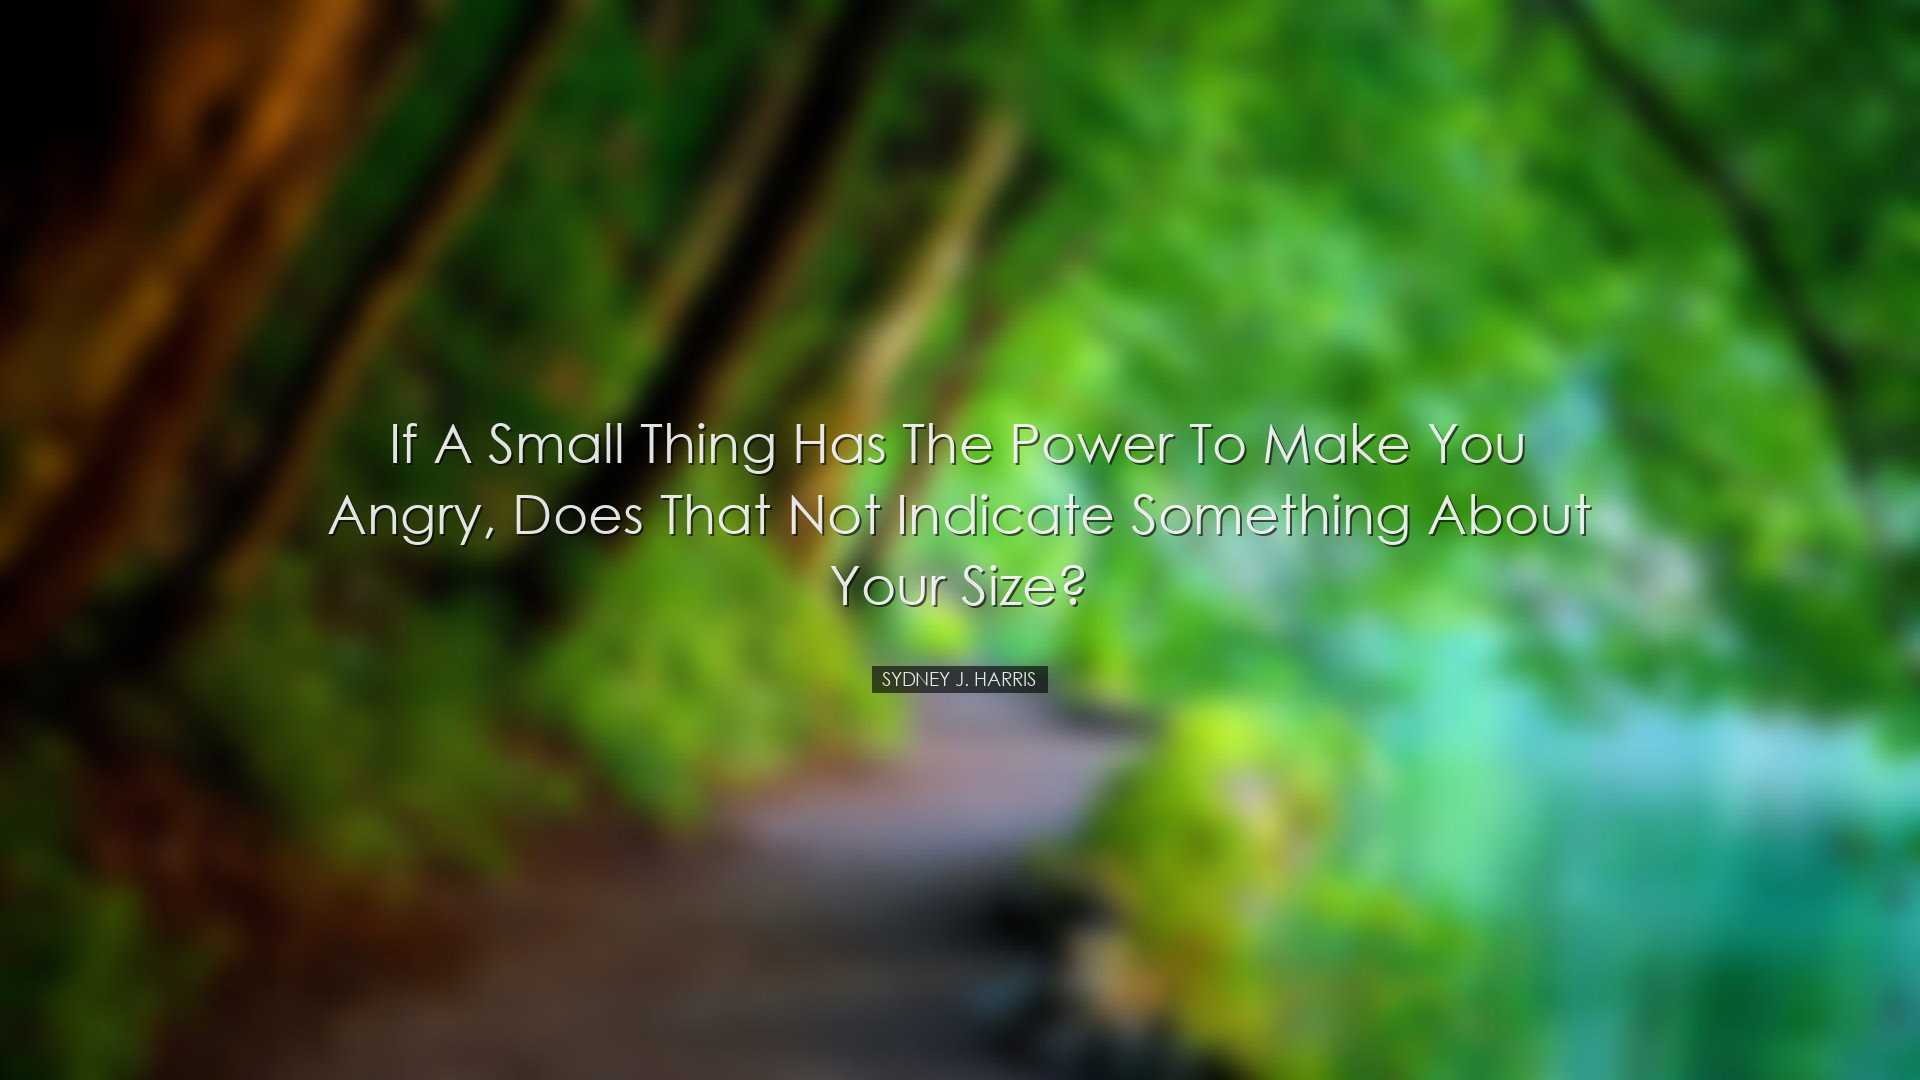 If a small thing has the power to make you angry, does that not in